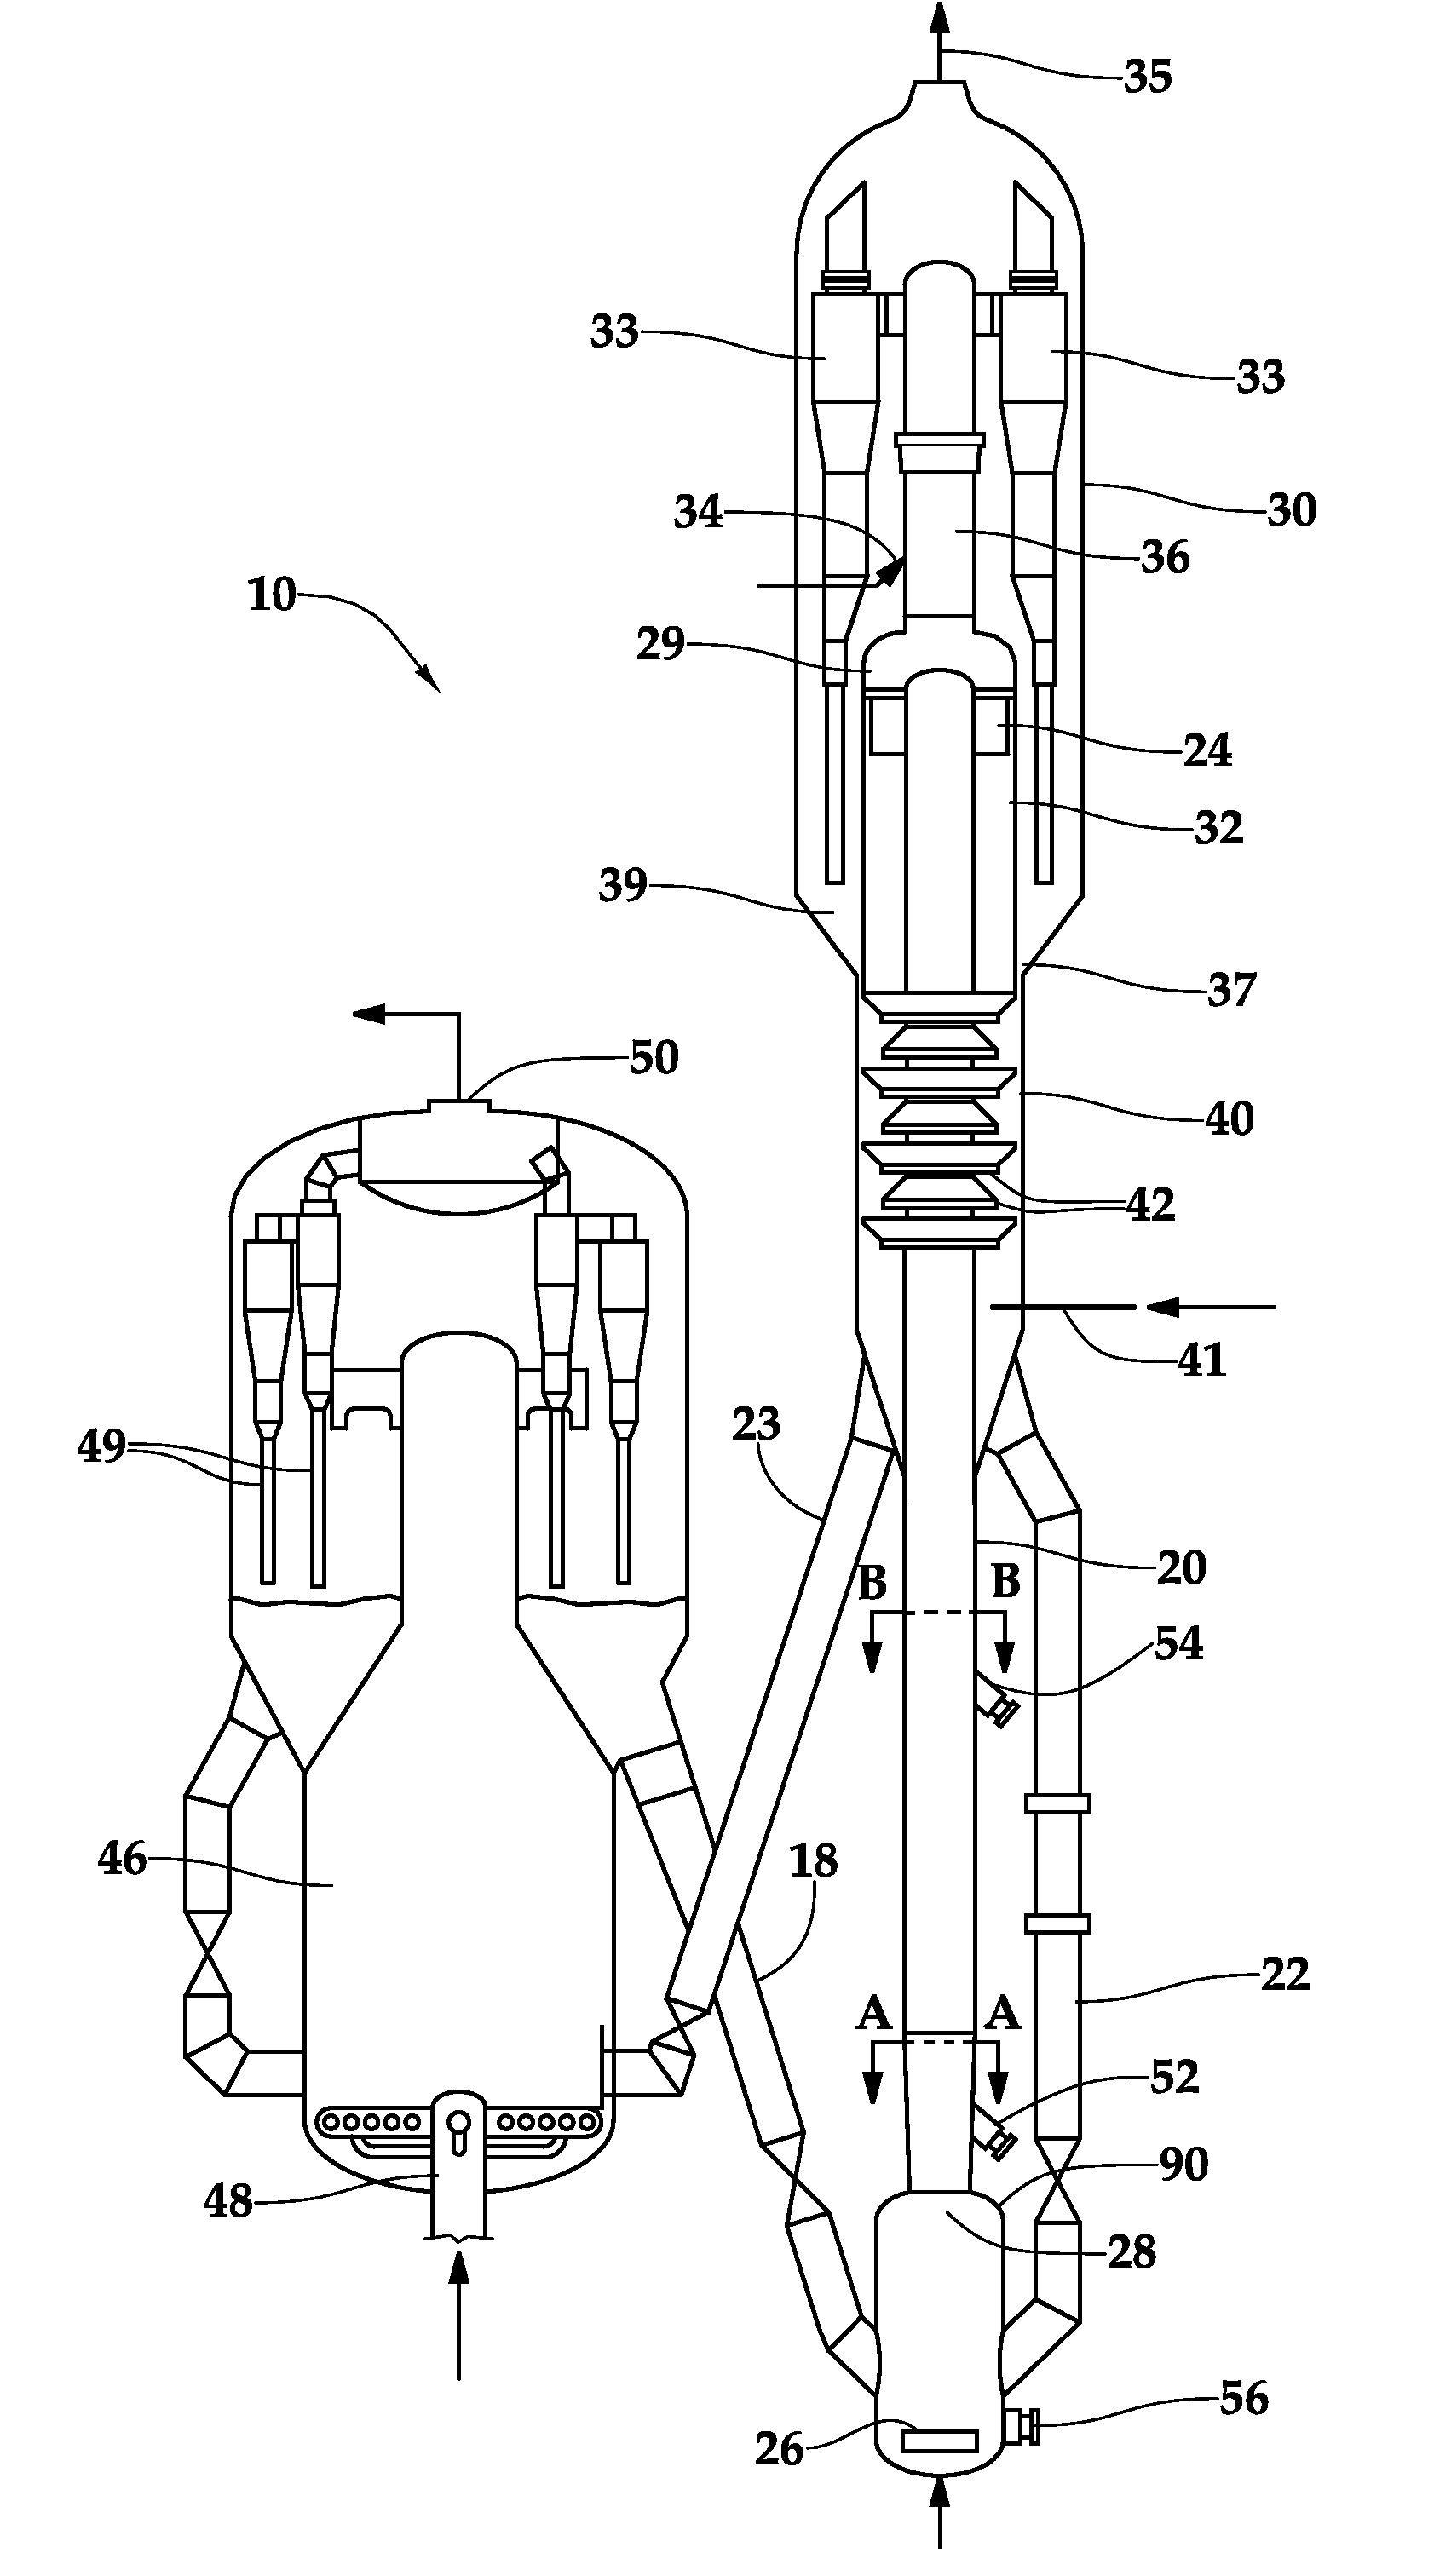 Fcc dual elevation riser feed distributors for gasoline and light olefin modes of operation